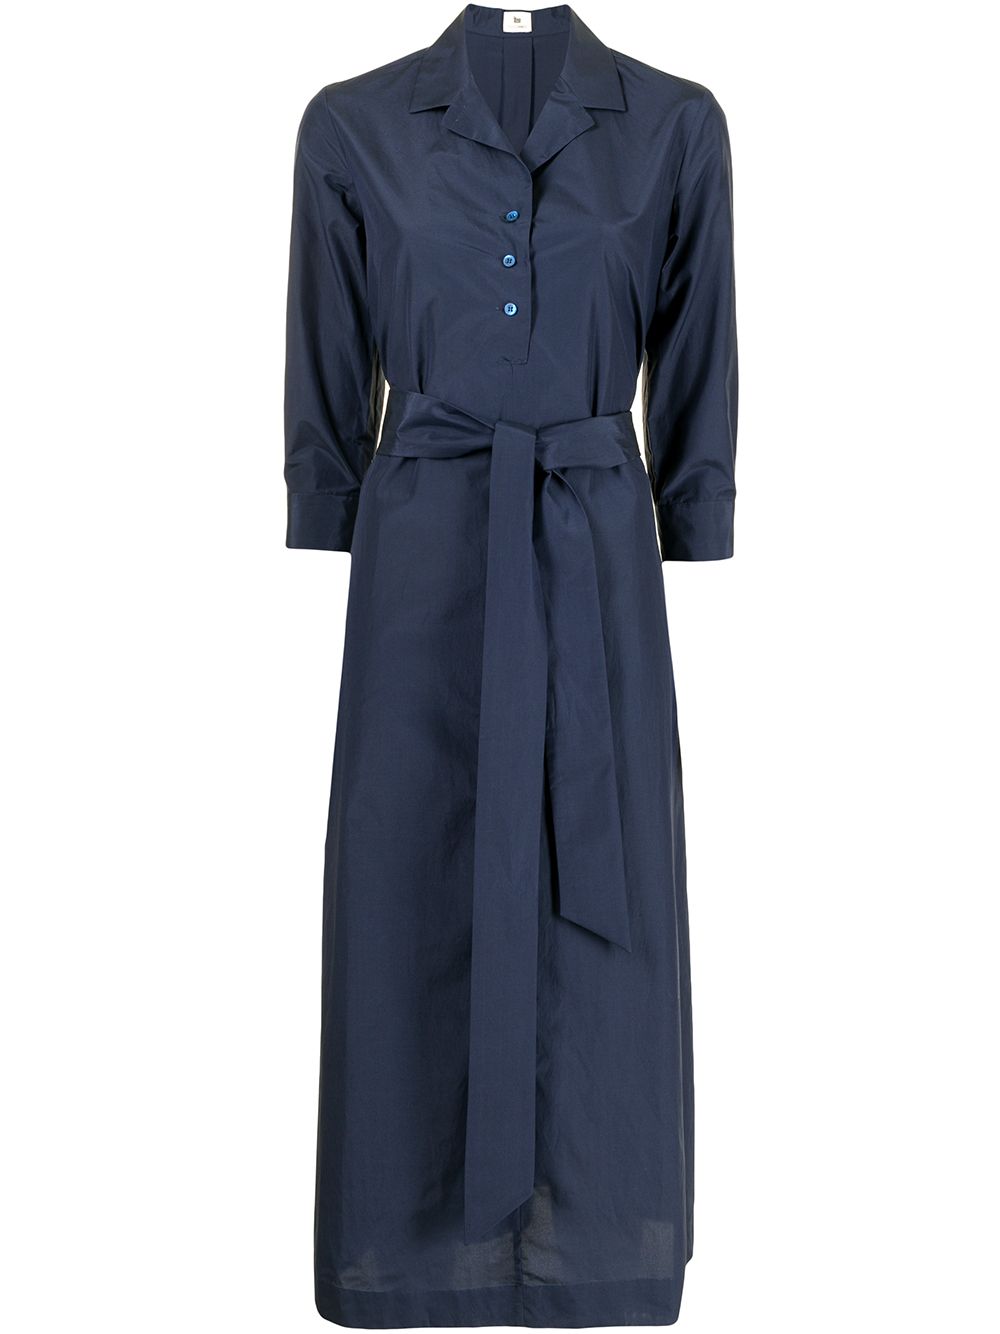 Shop Colombo belted midi shirt dress with Express Delivery - FARFETCH